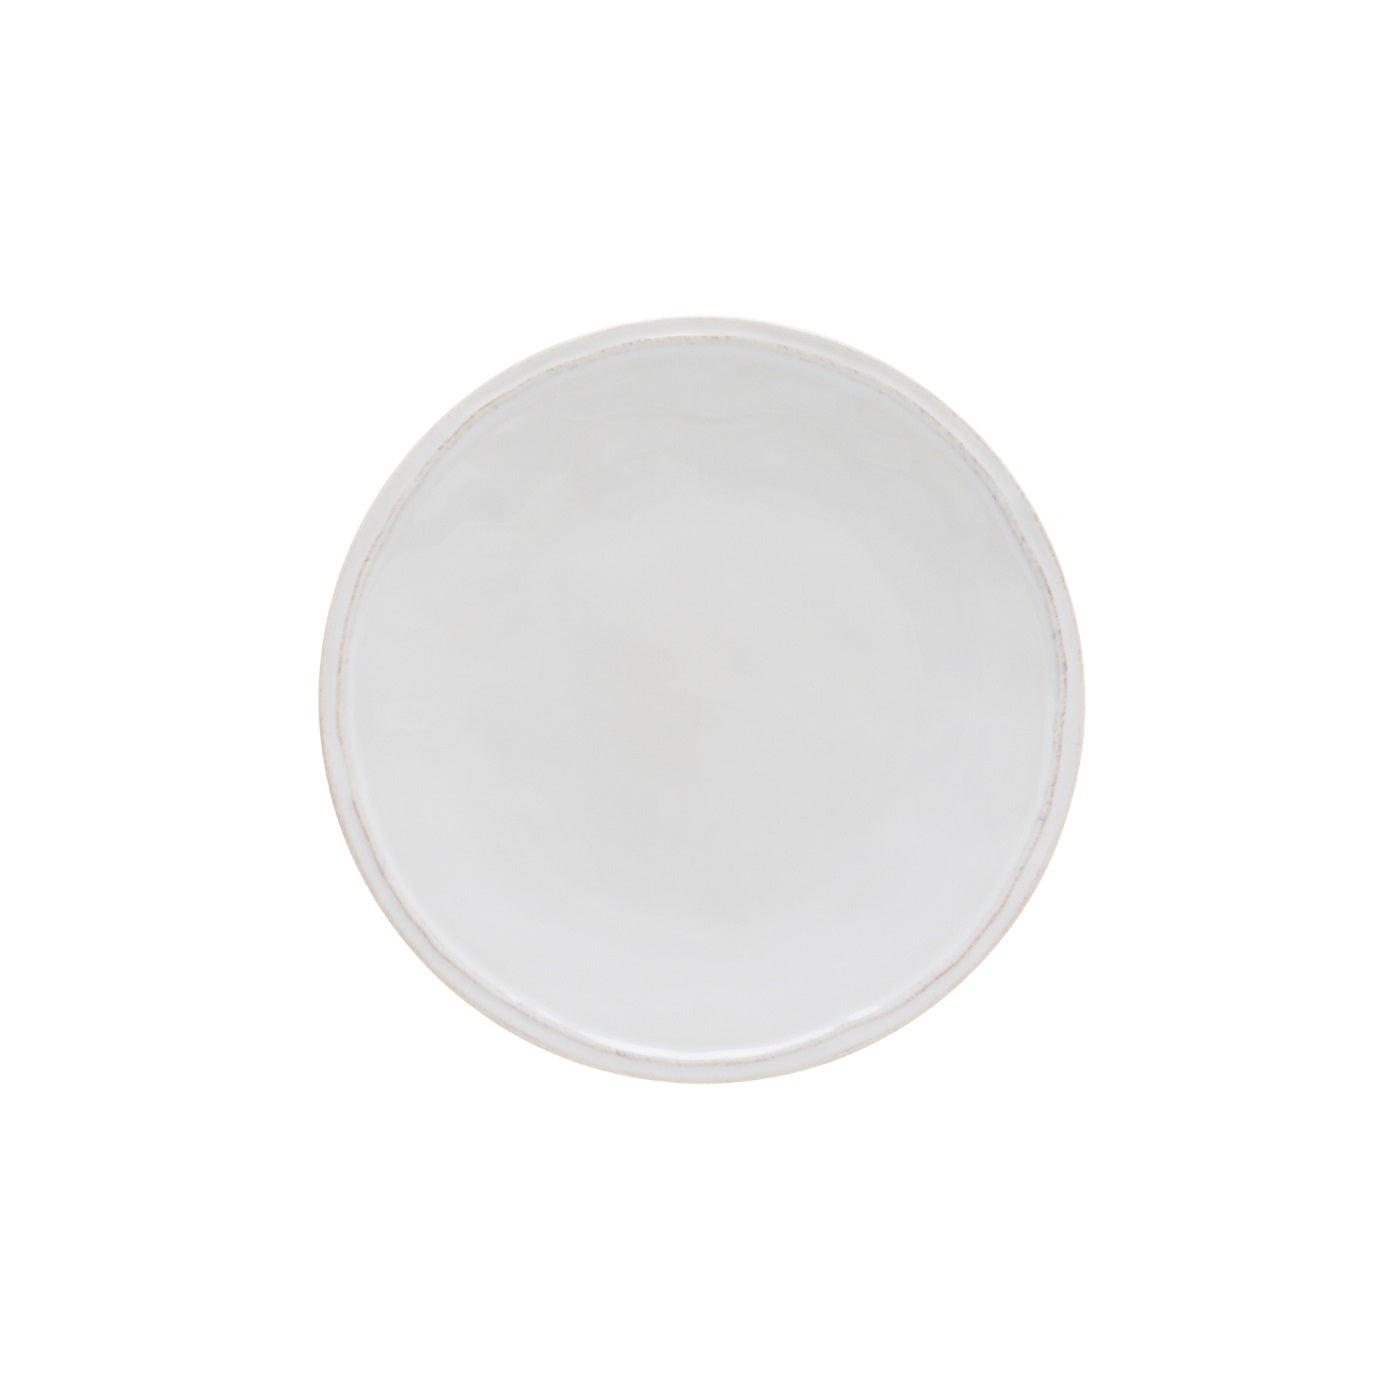 Pearly white side plate with raised border.